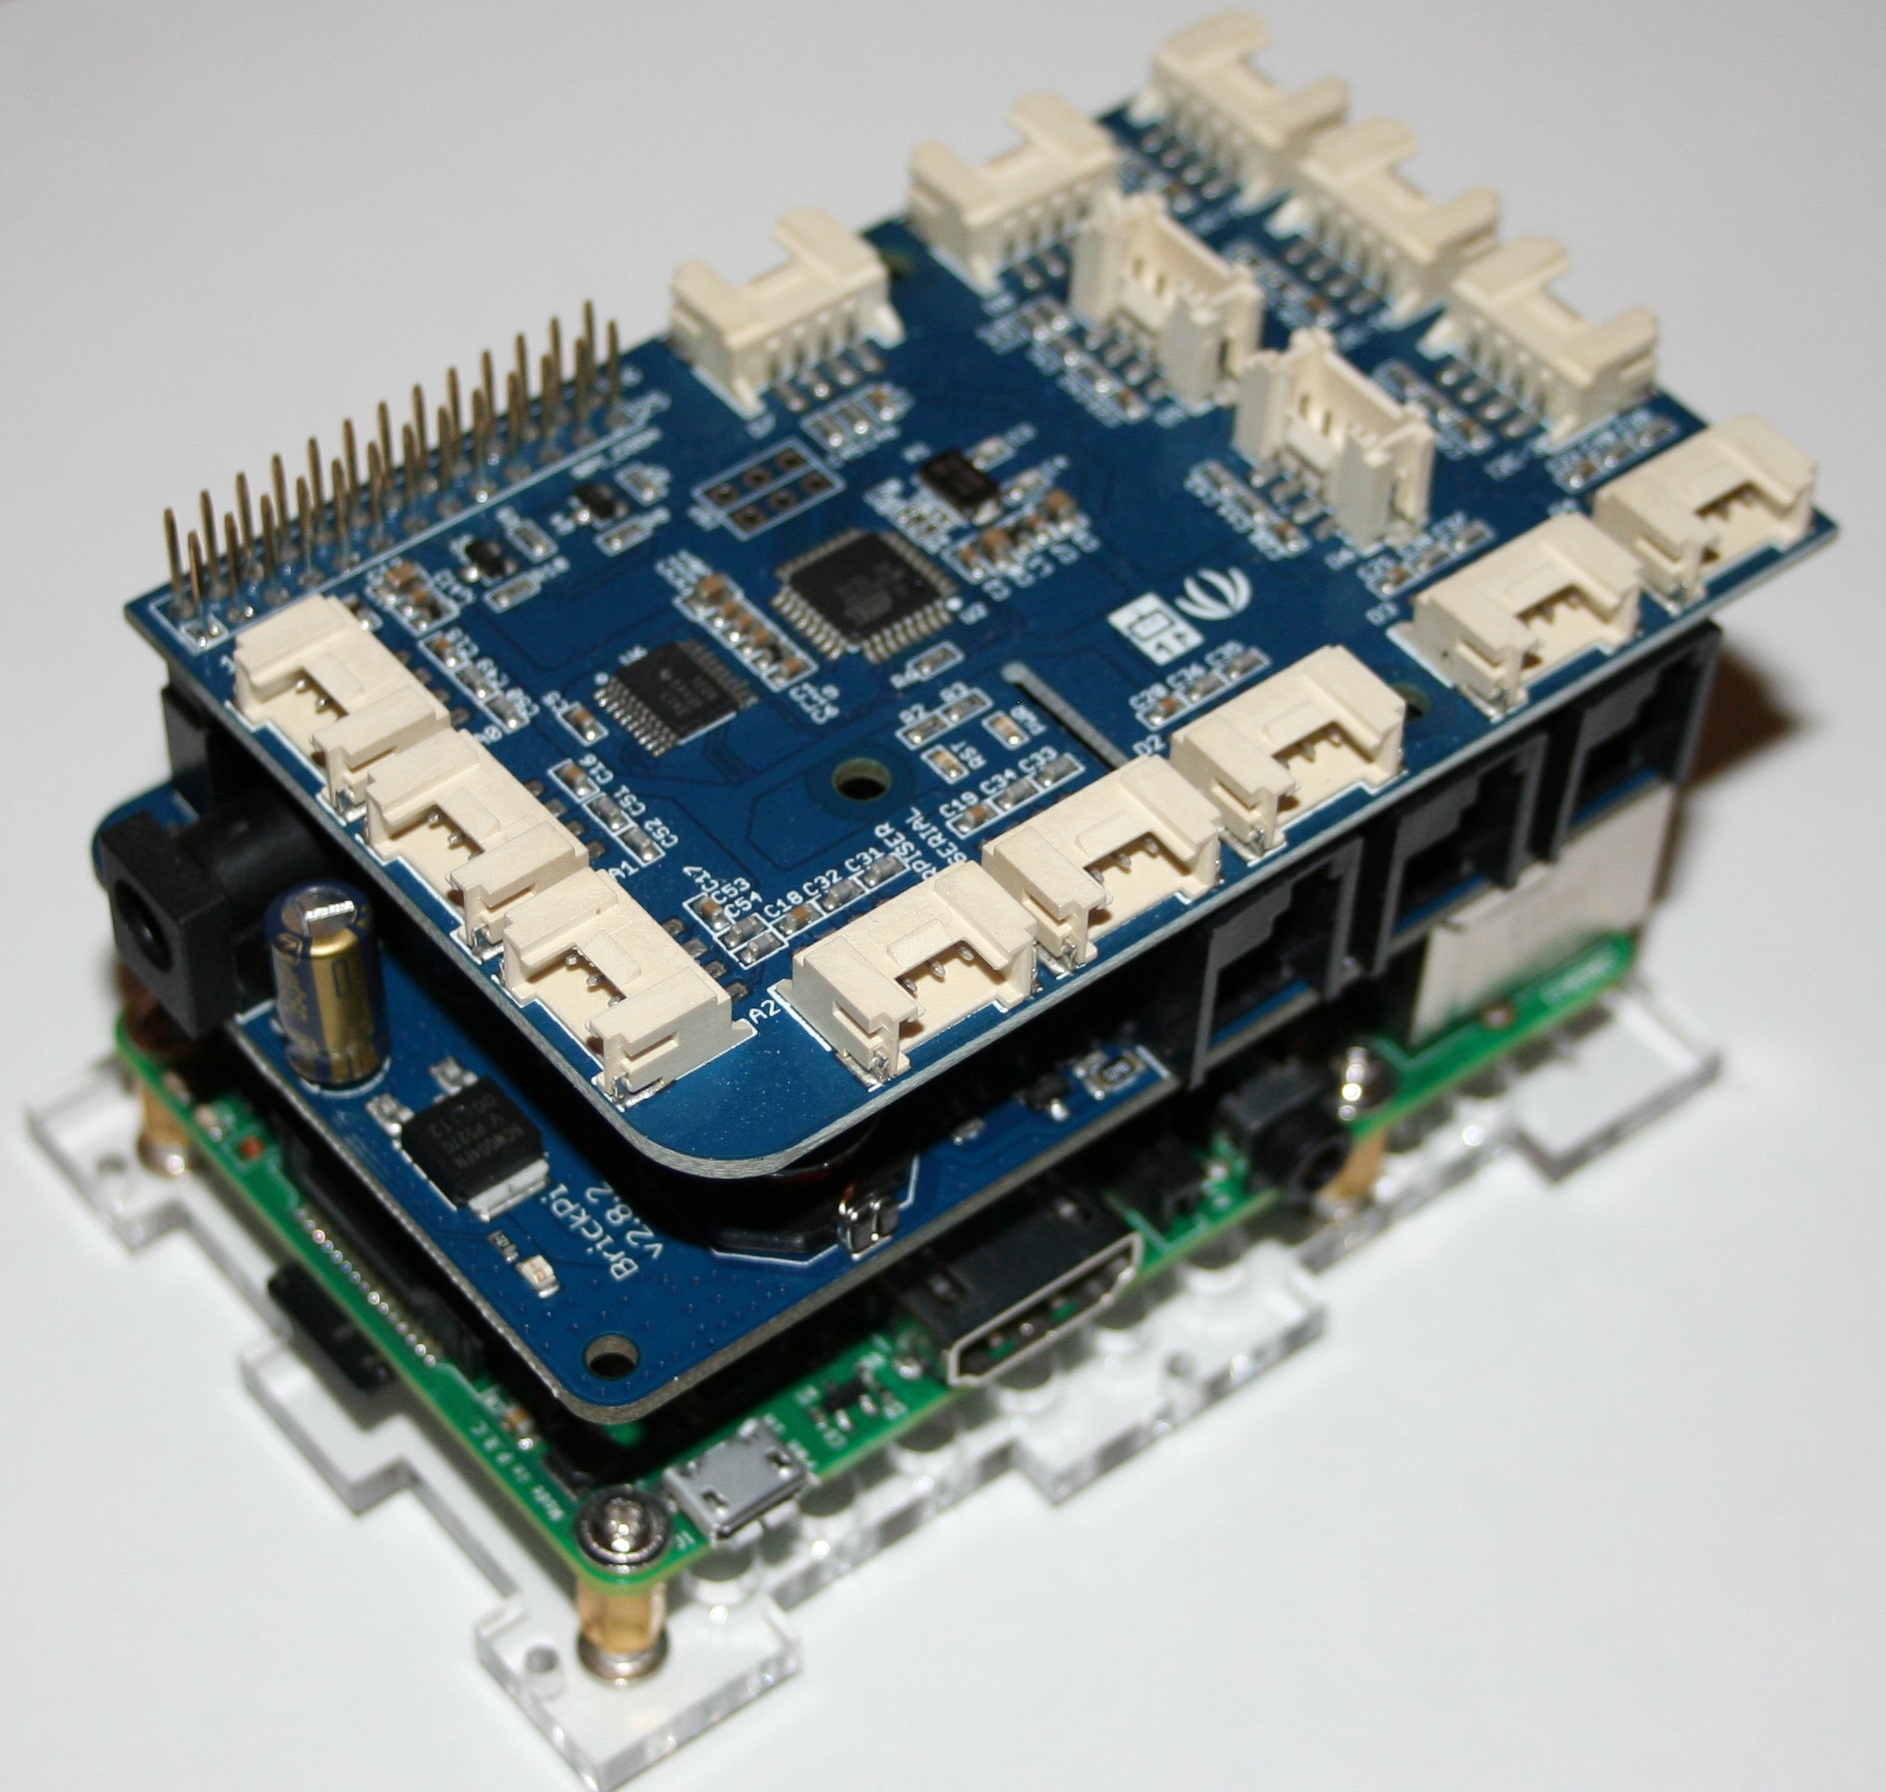 The BrickPi and GrovePi can be stacked on a Raspberry Pi.